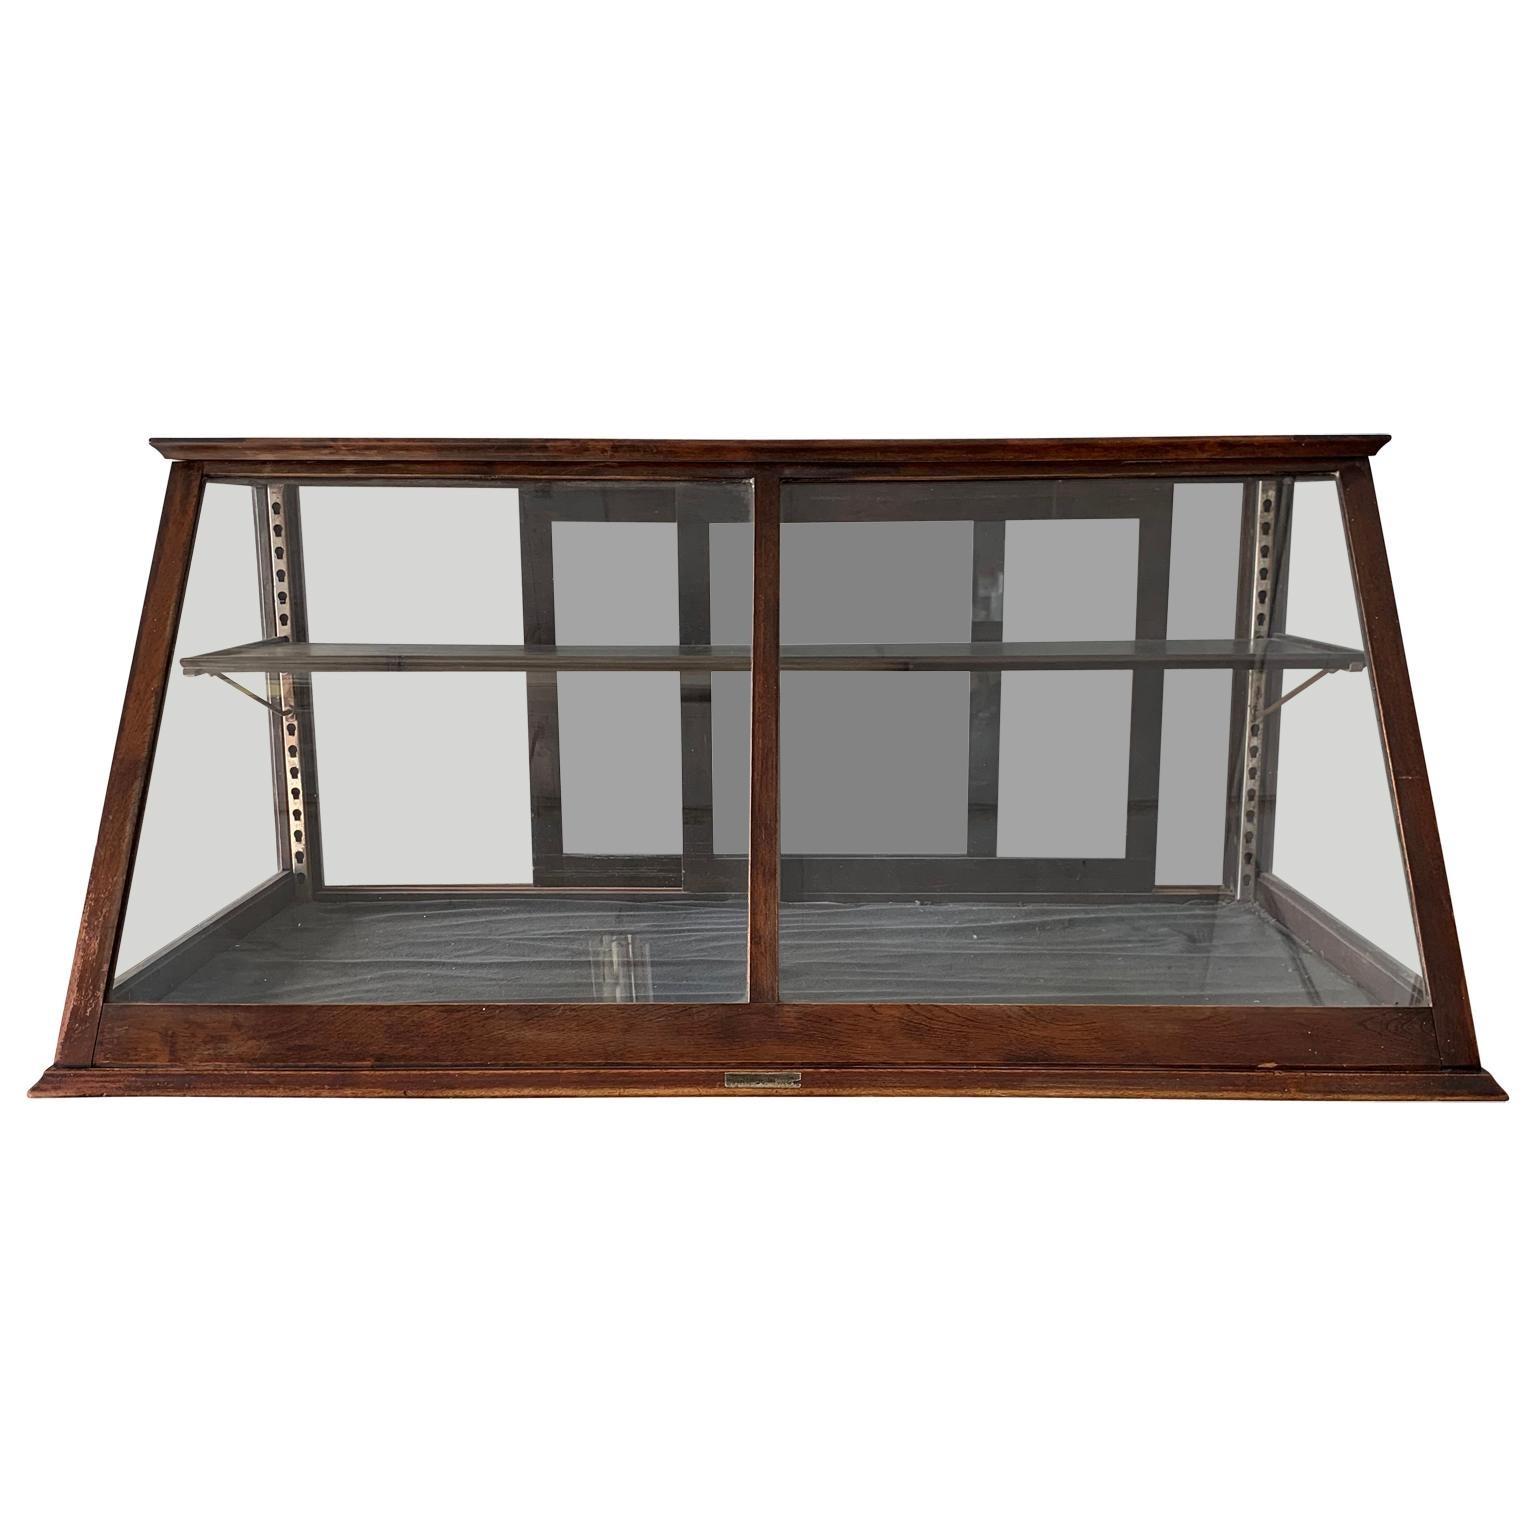 Antique one-tier tabletop store display cabinet by Waddell Company Inc, Greenfield, Ohio.